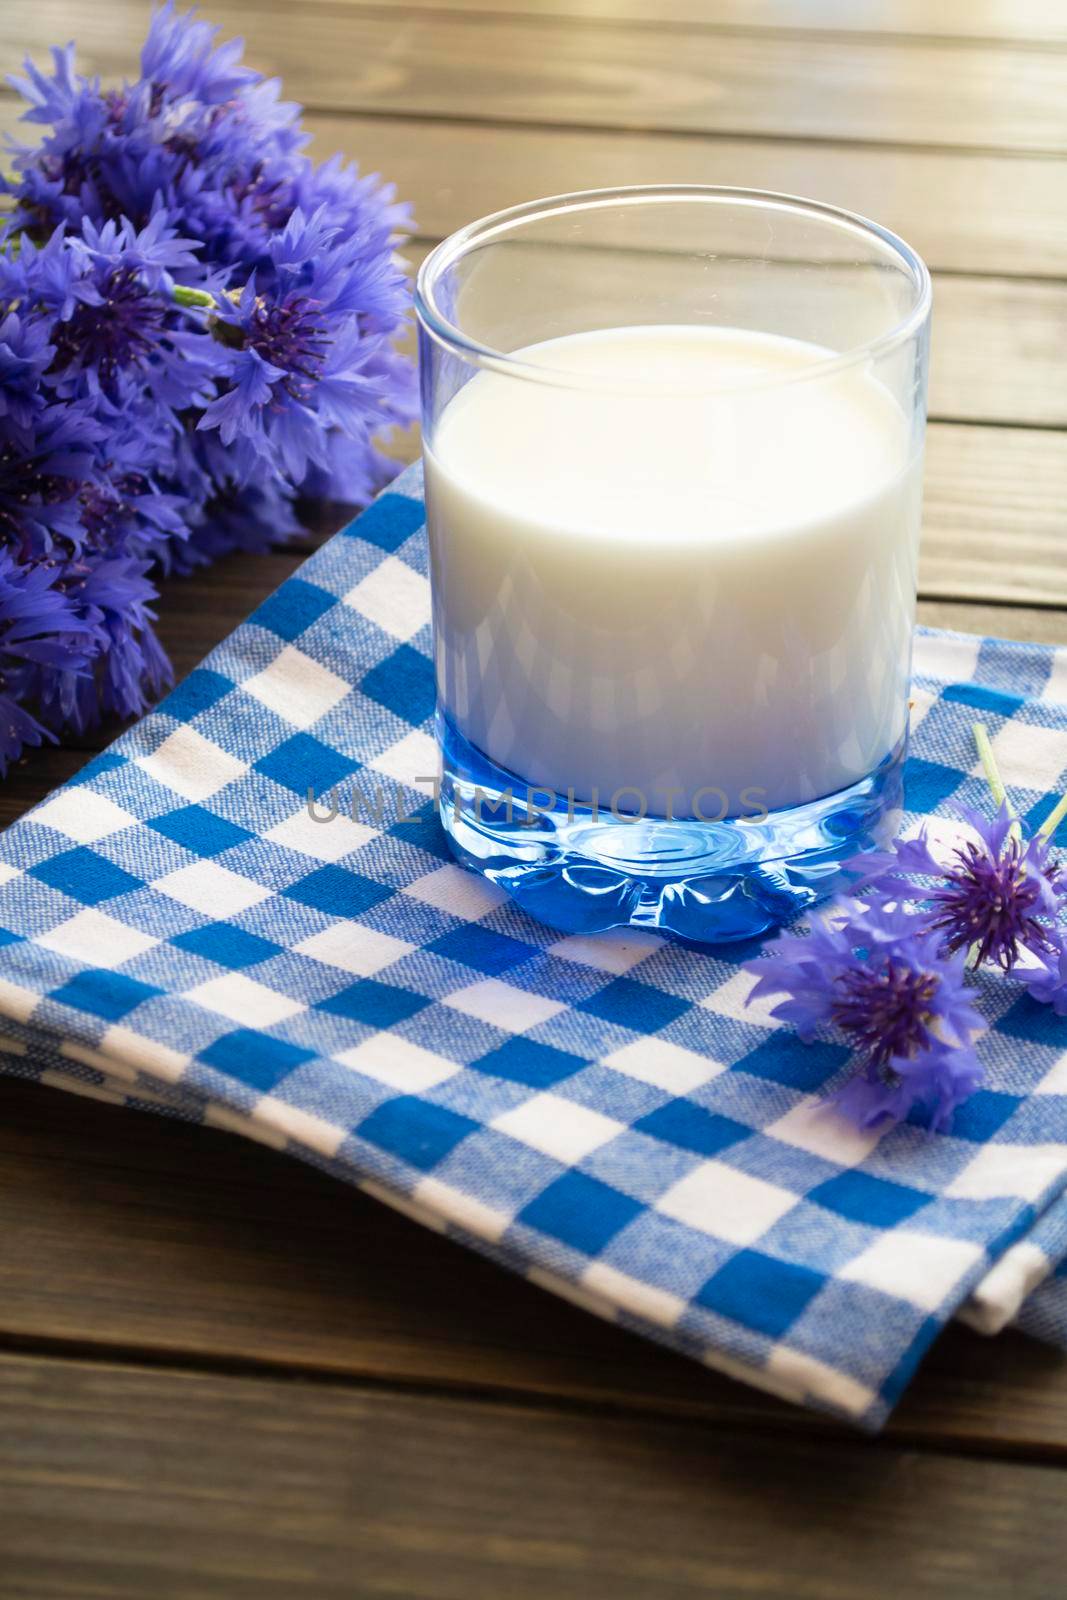 Jar of milk and cornflowers on a old brown wooden table. Vertical image